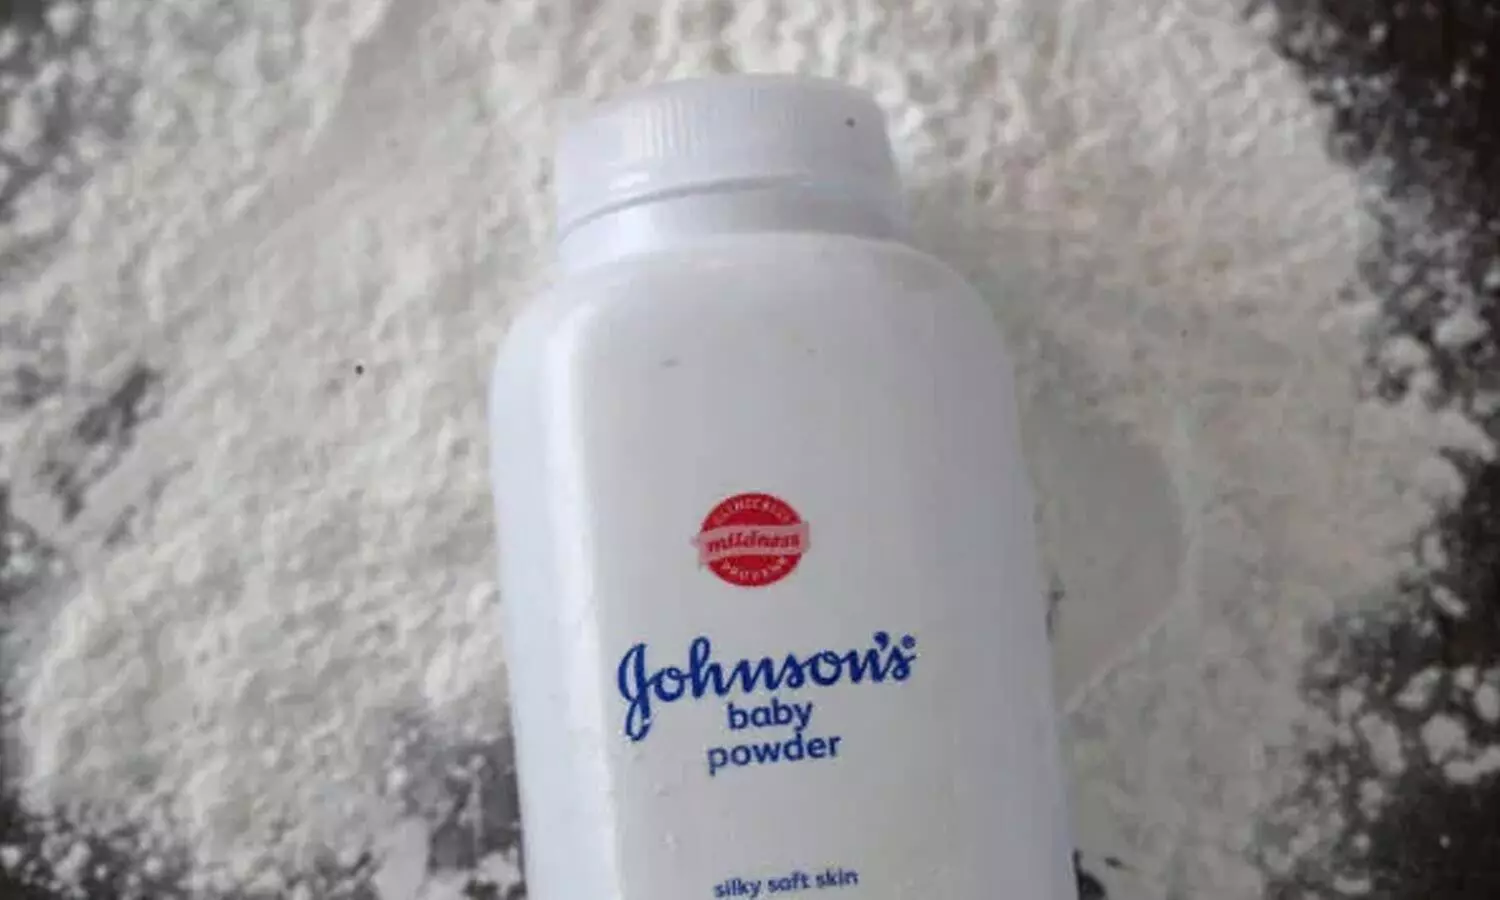 JnJ puts newly created subsidiary into bankruptcy over baby powder claims